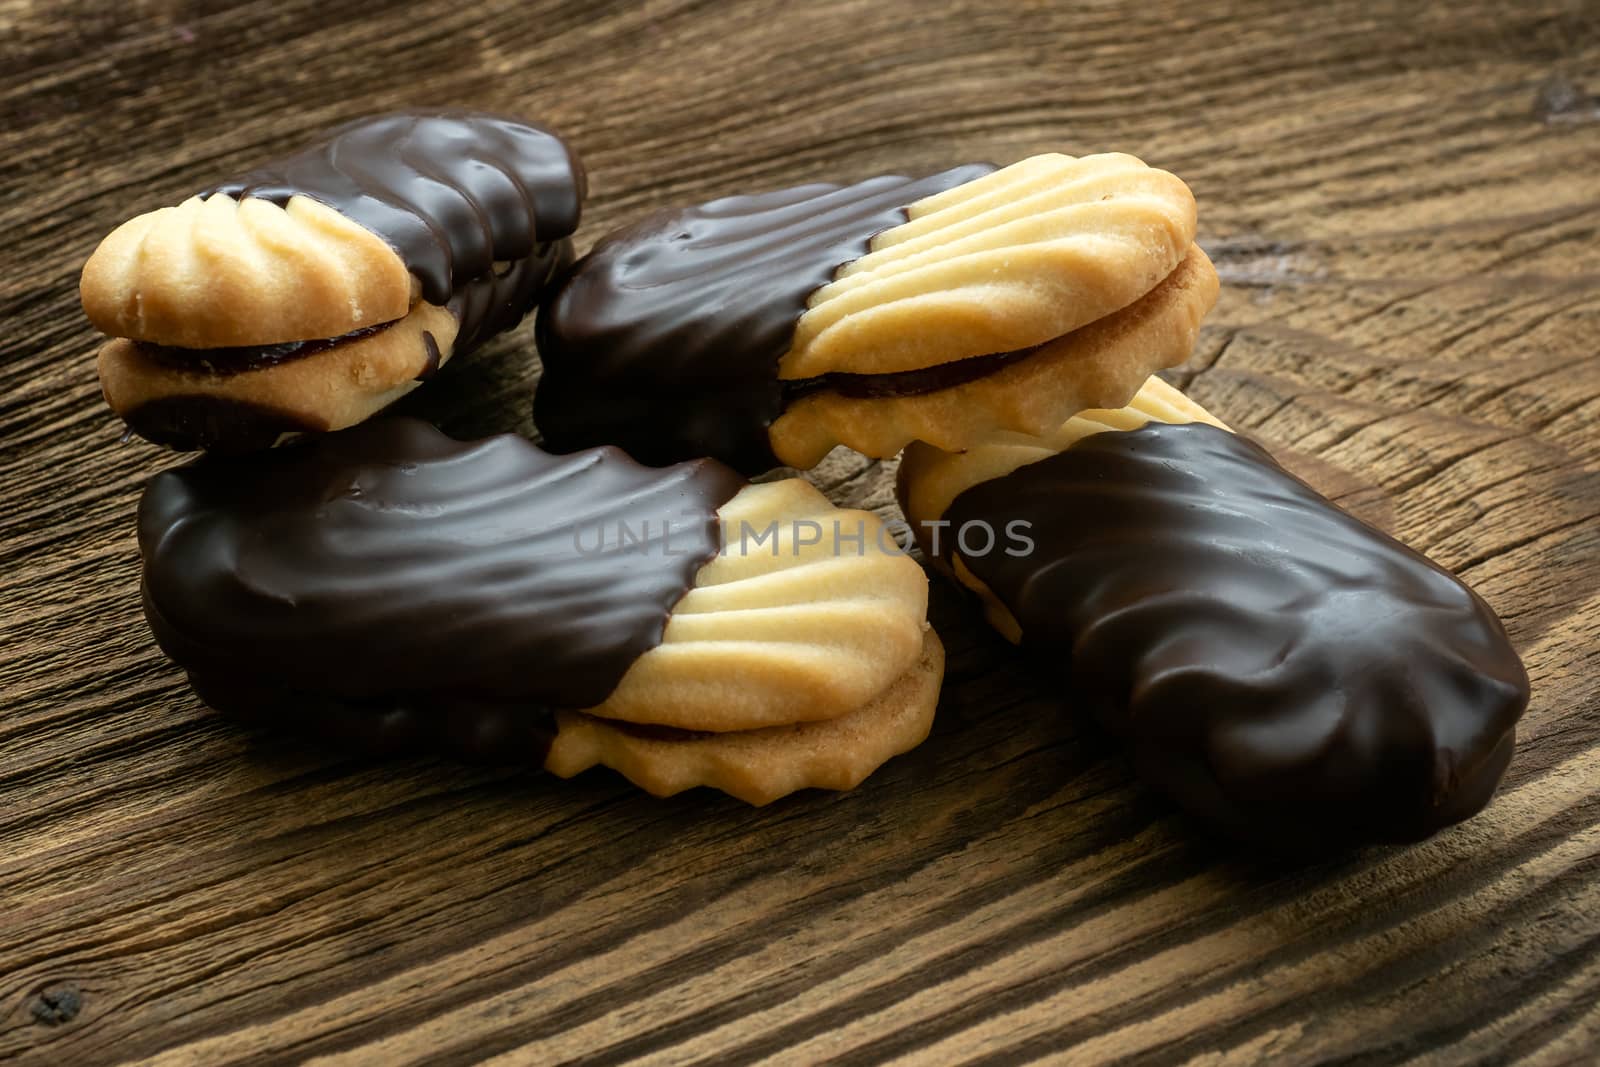 Cookies on wooden table. Biscuits with filling on wooden desk. Sweet cookies dipped in chocolate.